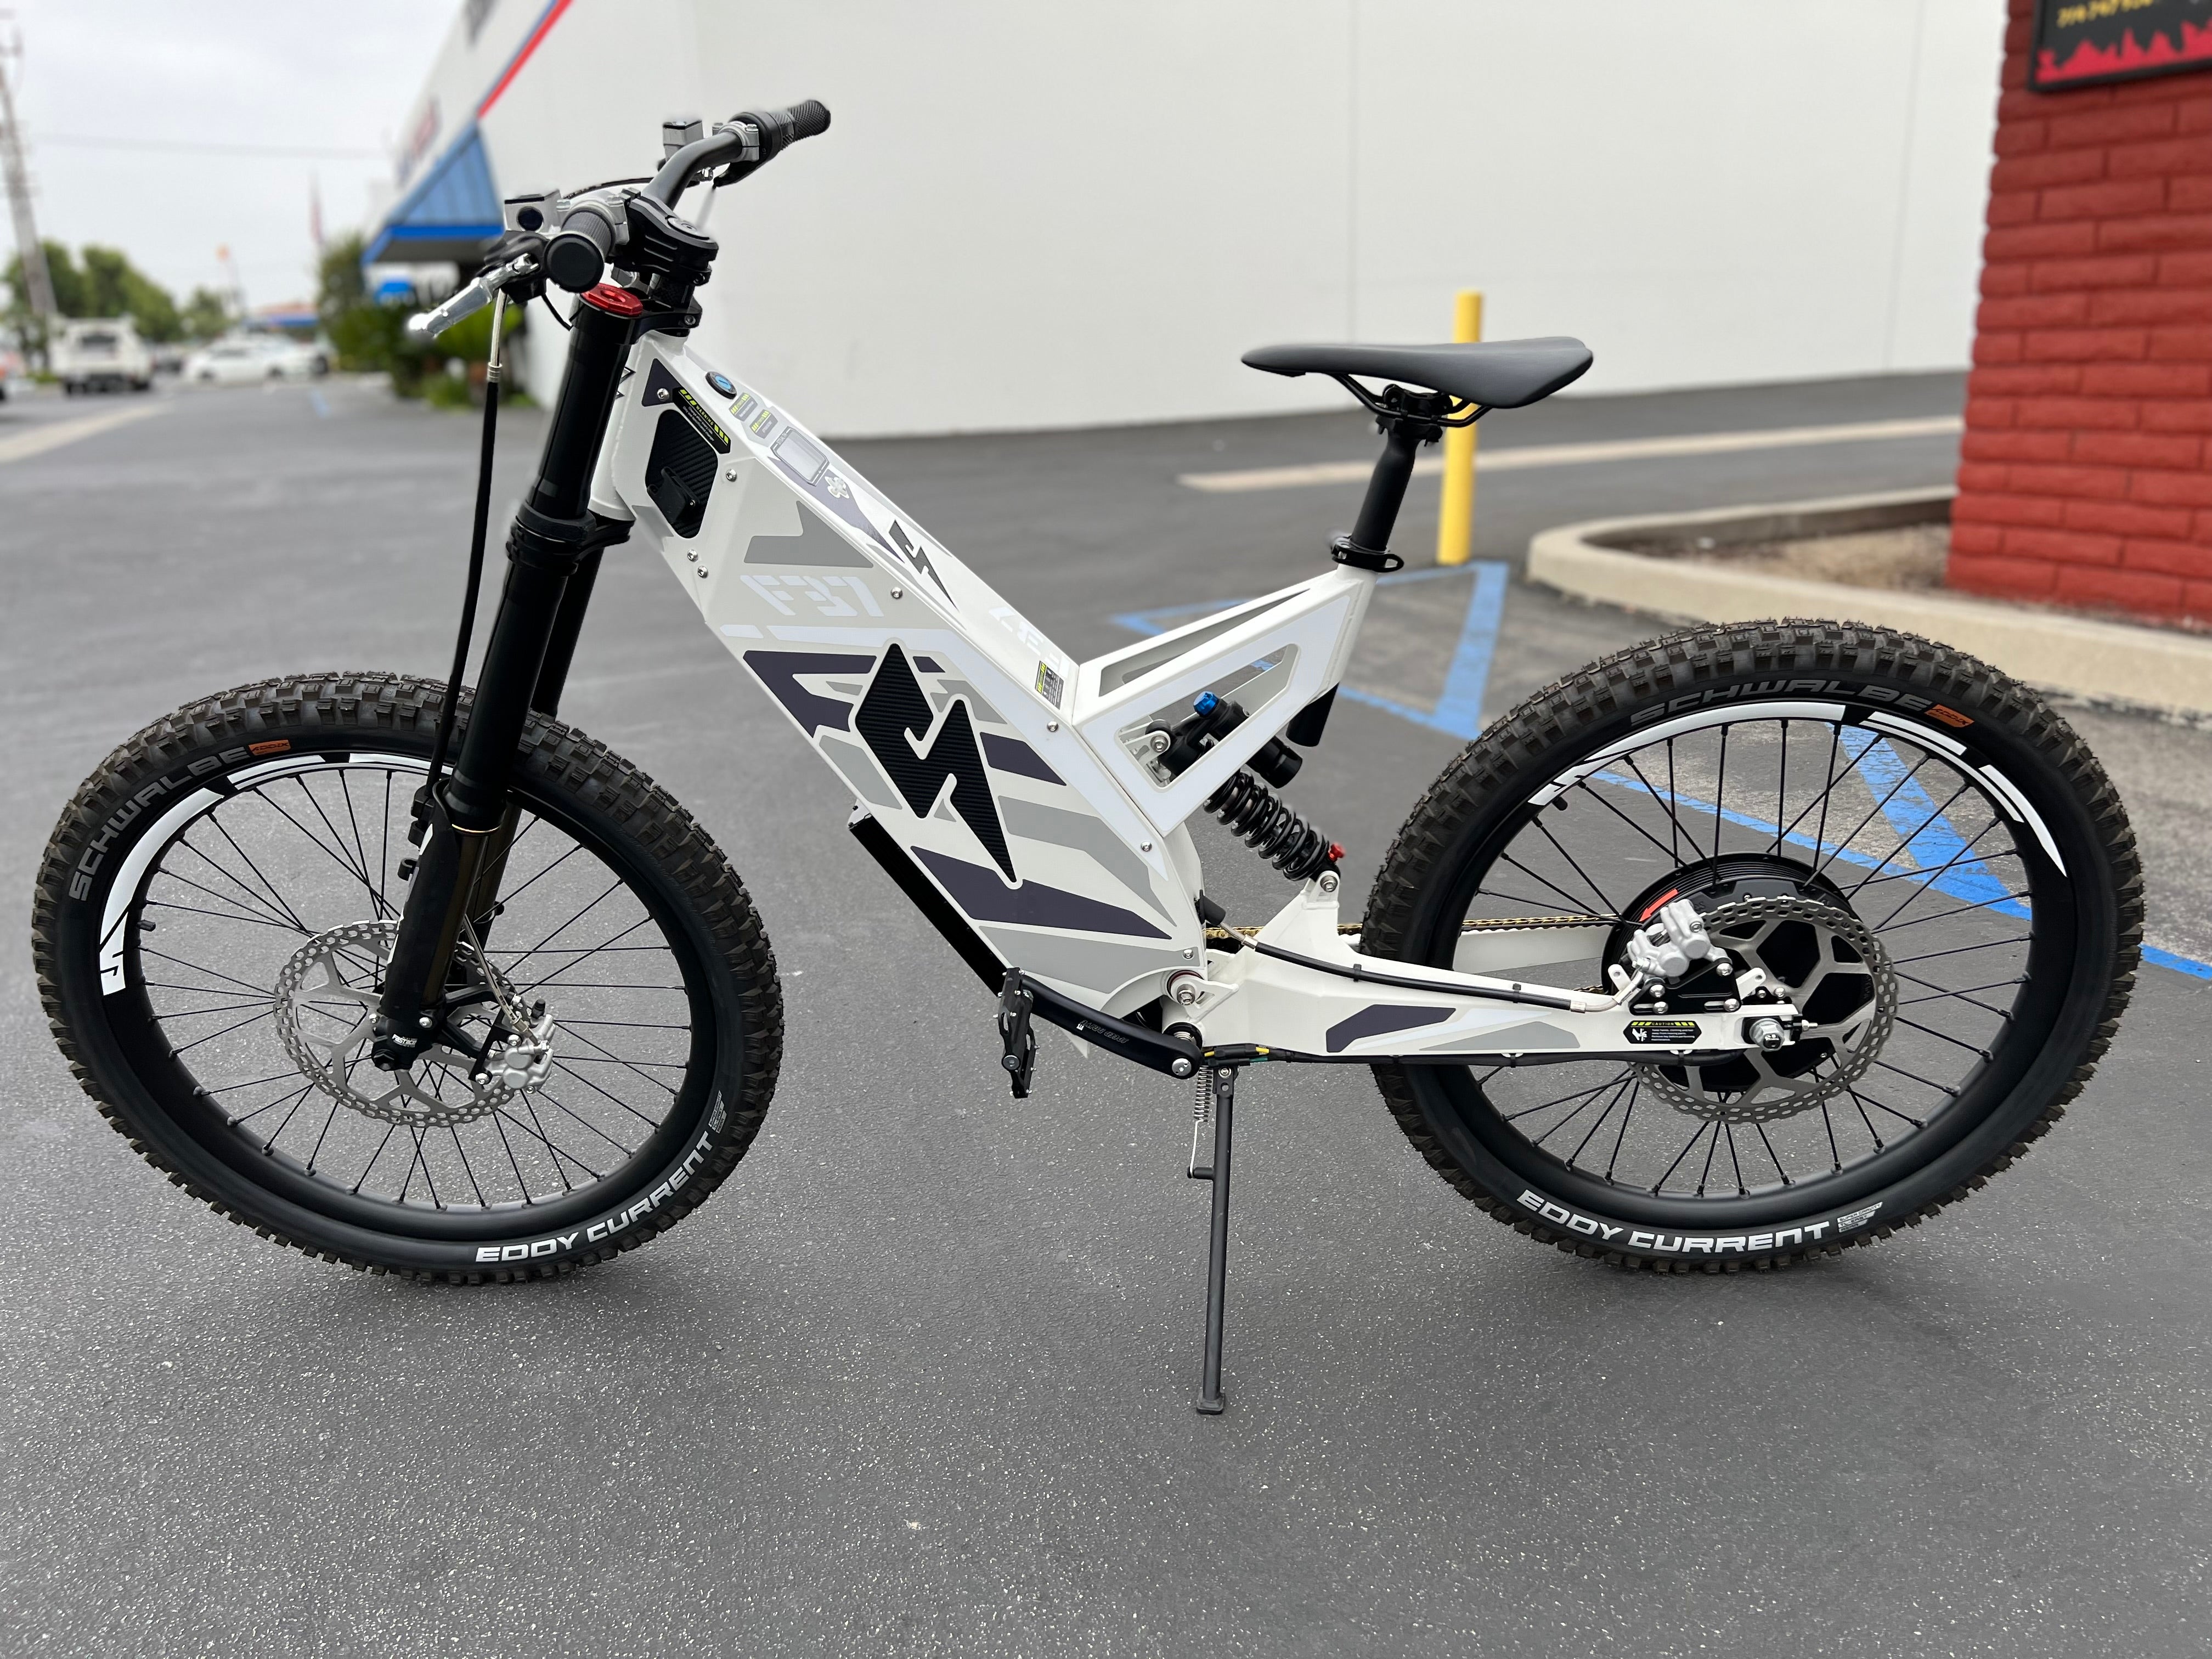 Stealth F37 Full Suspension Electric Bike, Snow Camo - in stock now